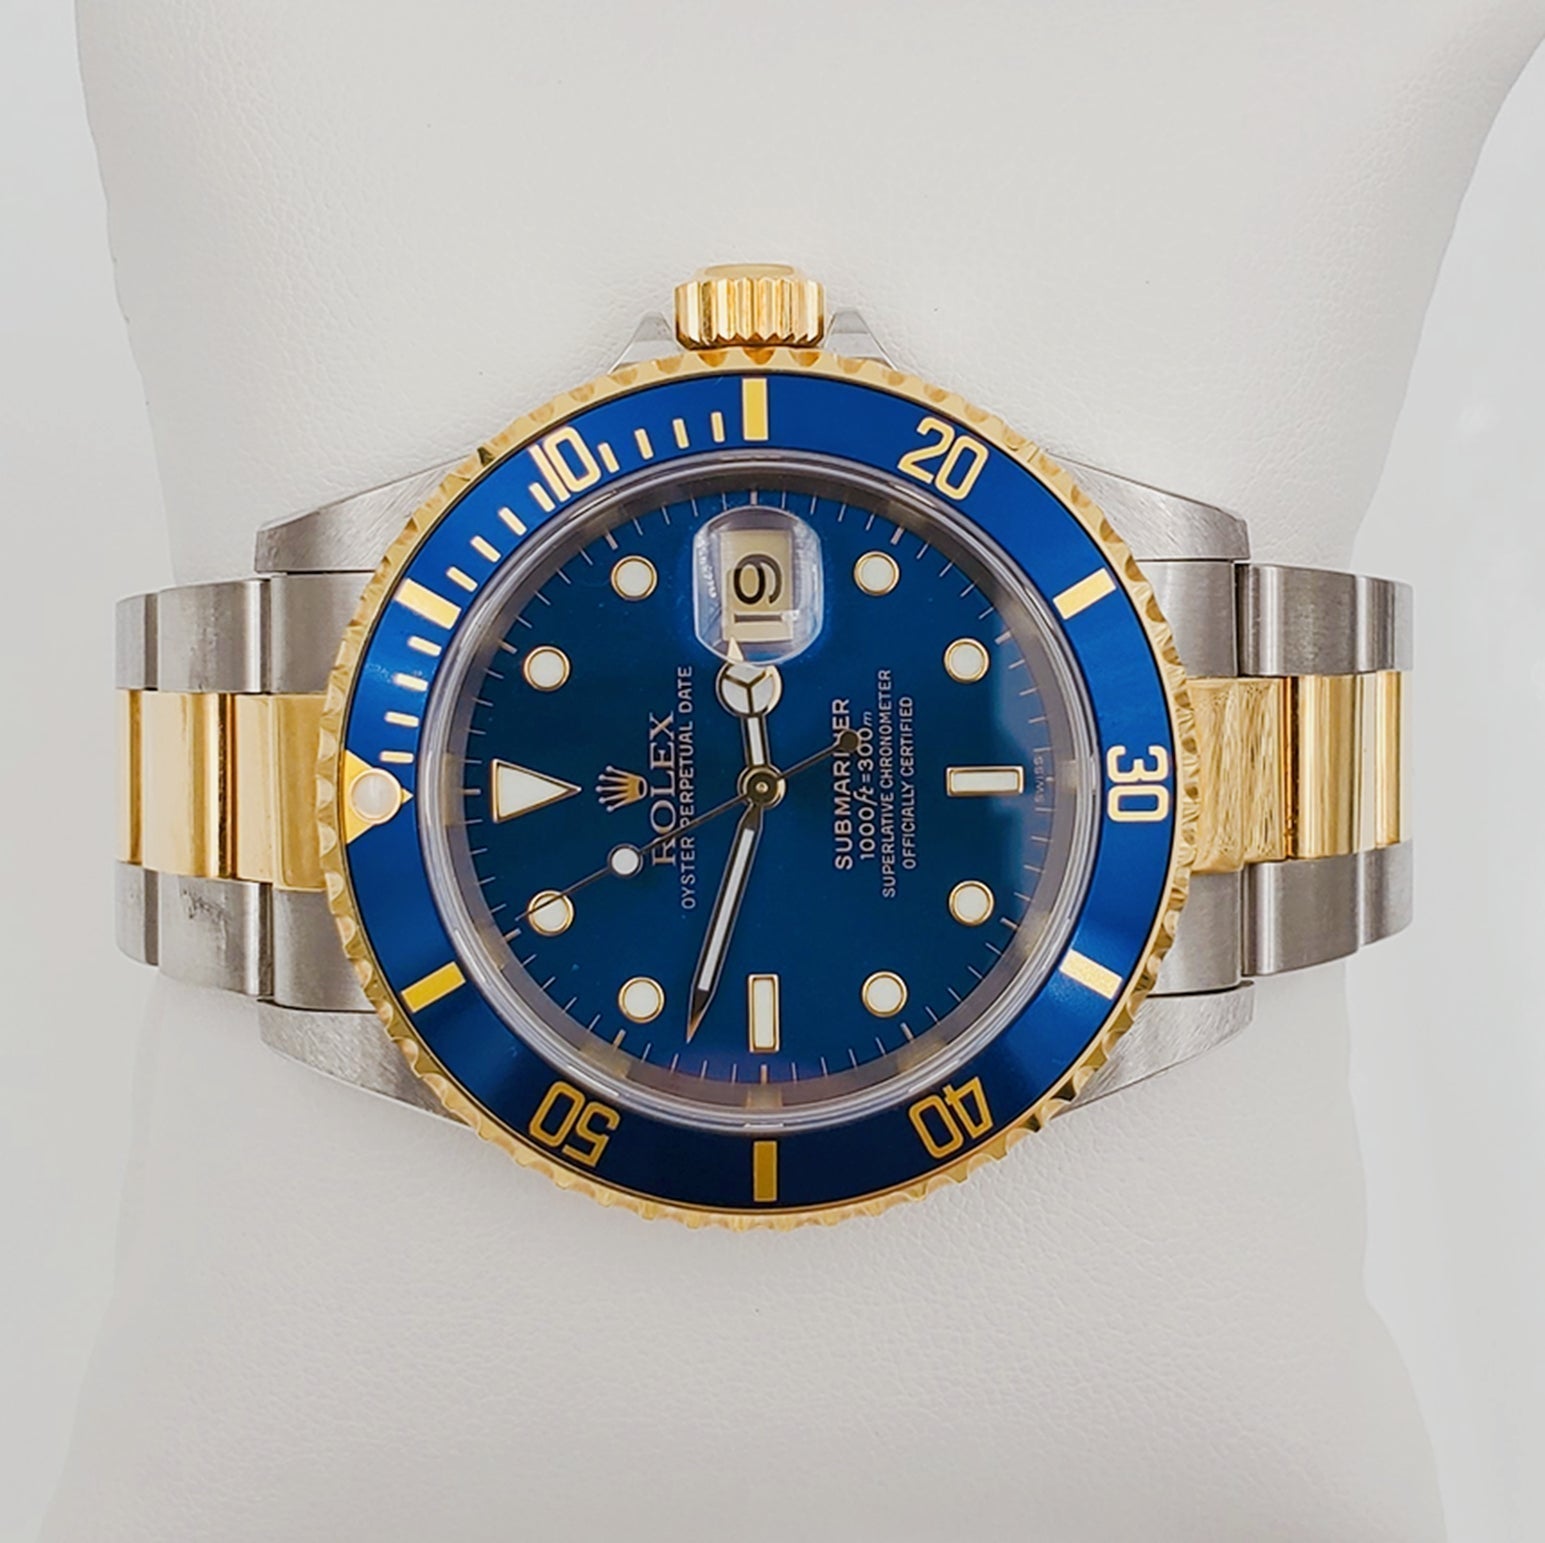 2003 Men's Rolex Submariner 40mm Two Tone Oyster Perpetual 18K Yellow Gold / Stainless Steel Wristwatch w/ Blue Dial & Blue Bezel. (Pre-Owned 16613)